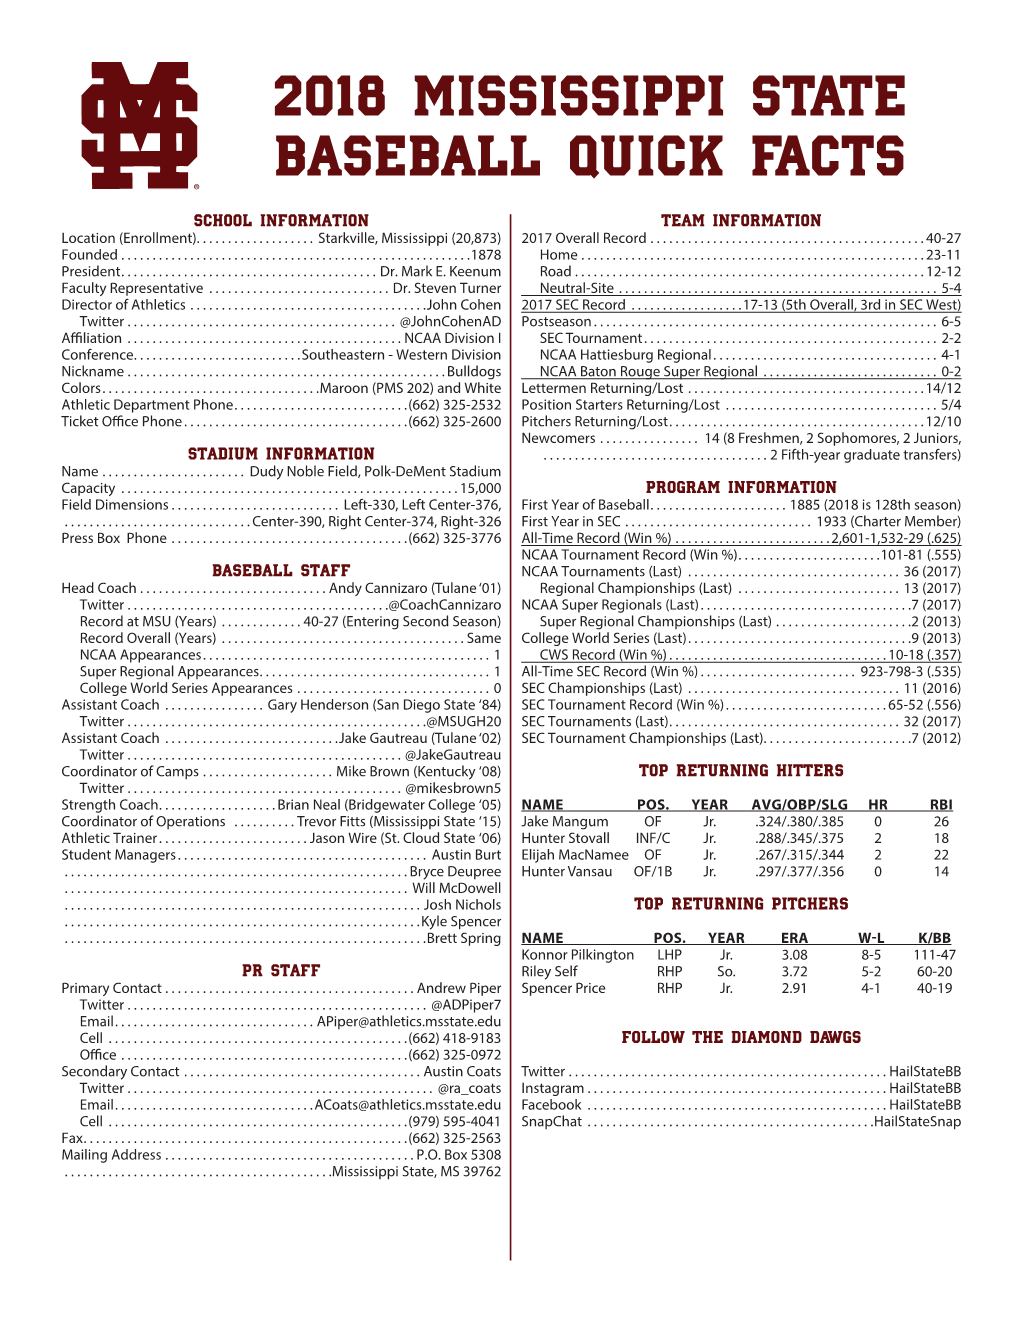 2018 Mississippi State Baseball Quick Facts